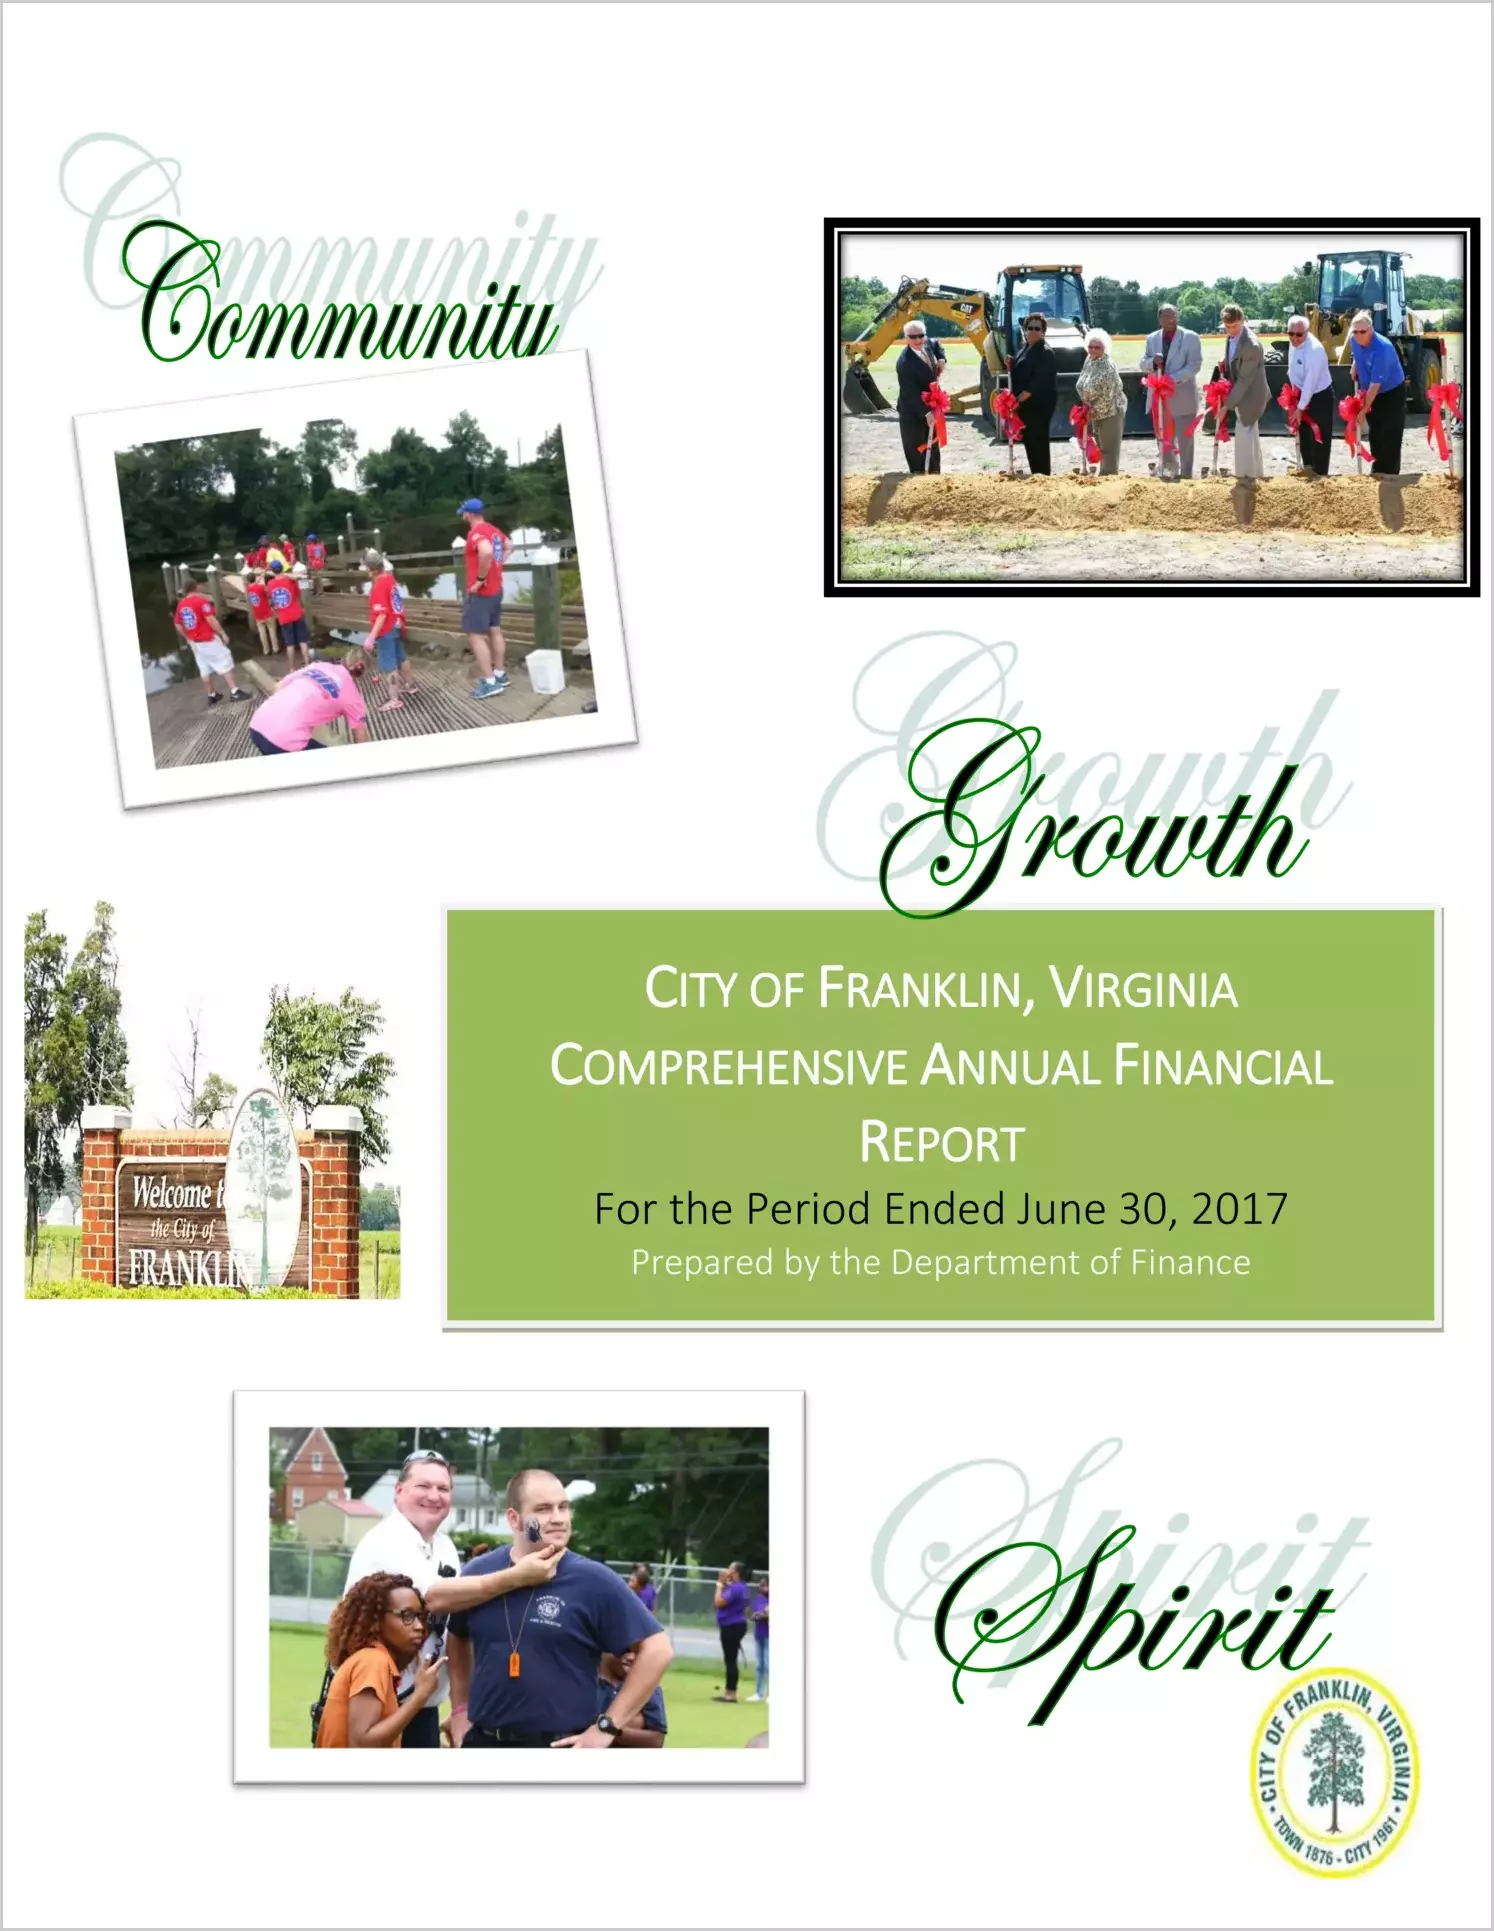 2017 Annual Financial Report for City of Franklin